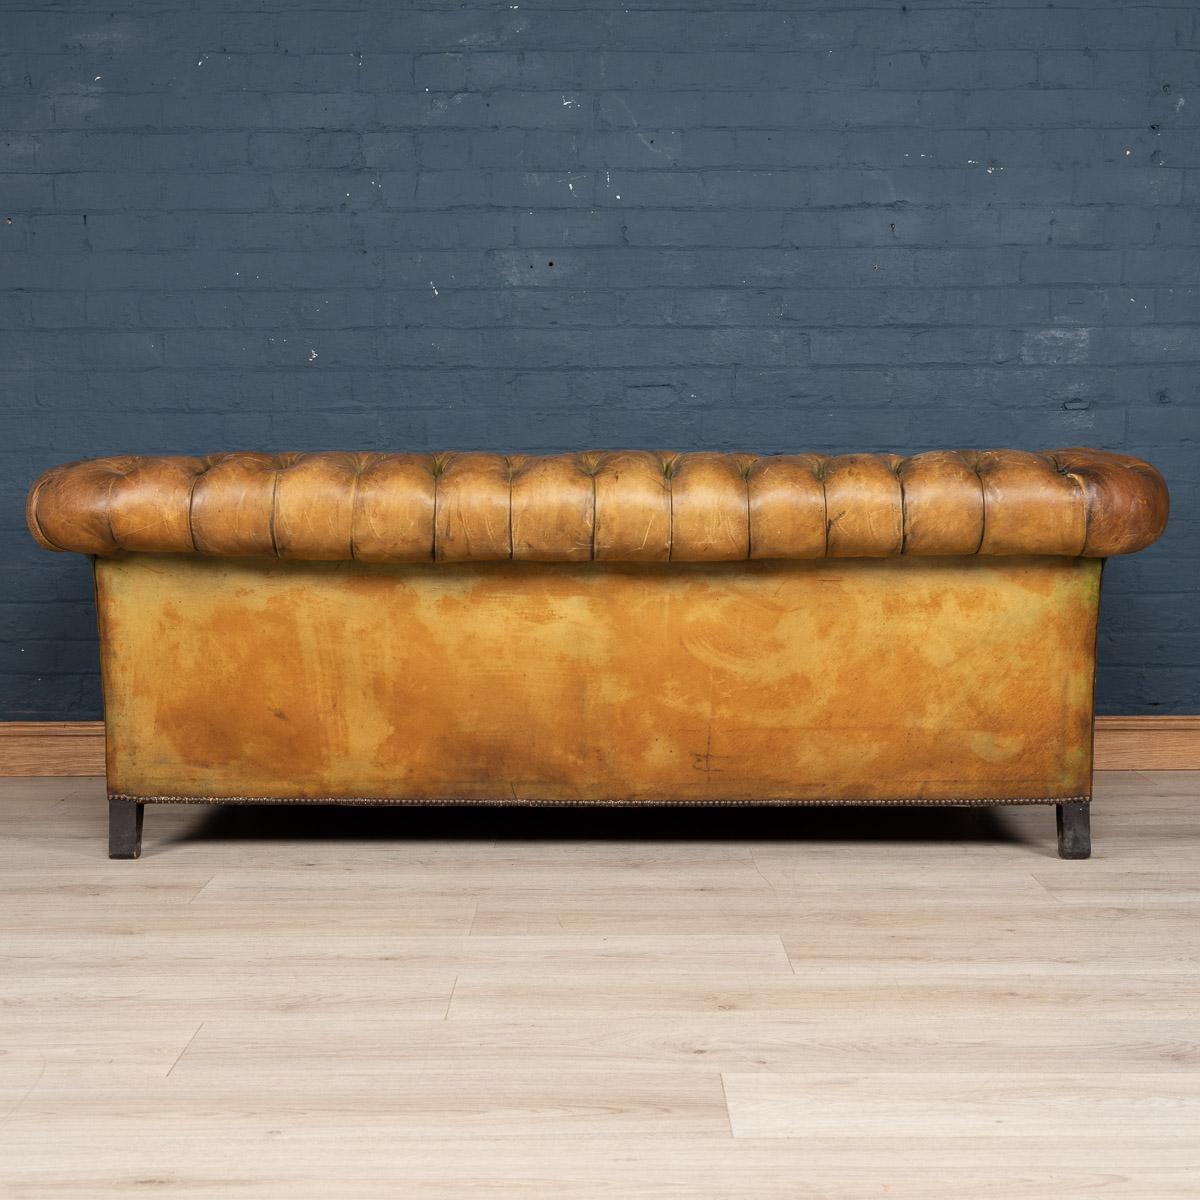 English 20th Century Chesterfield Leather Sofa with Button Down Seat, circa 1920